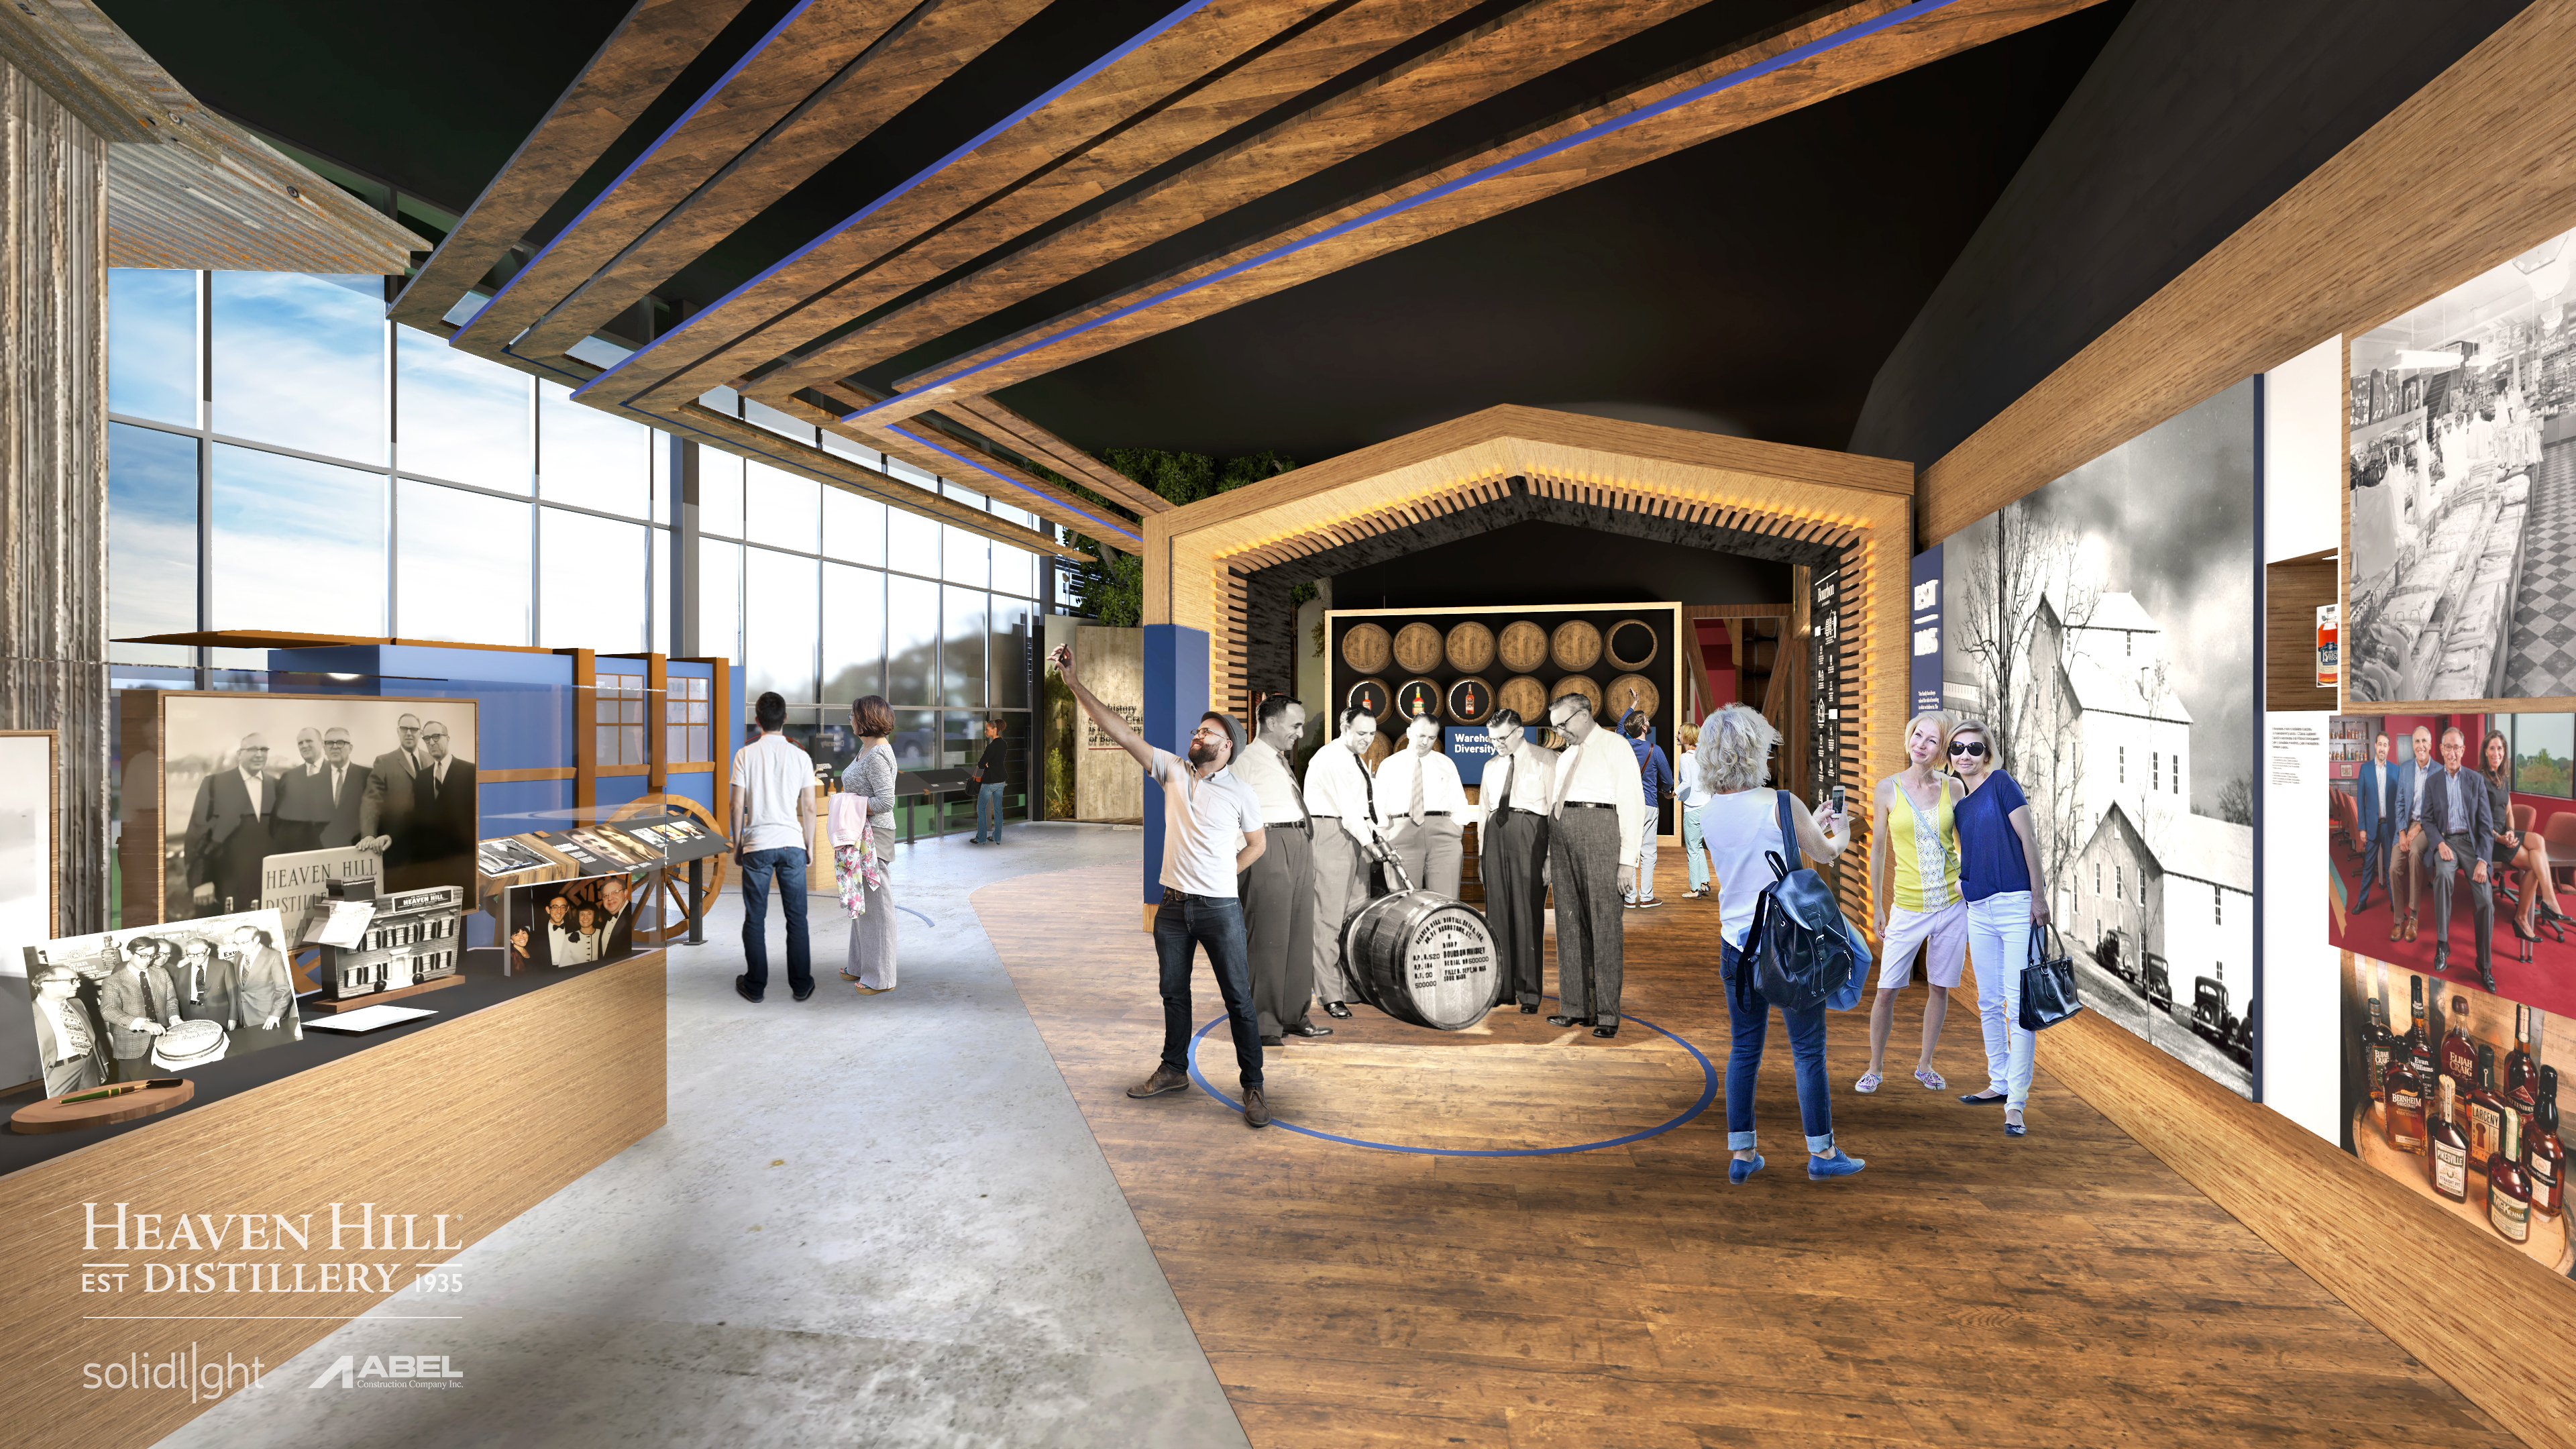 Artists rendering of the new tour space at Heaven Hill distillery.